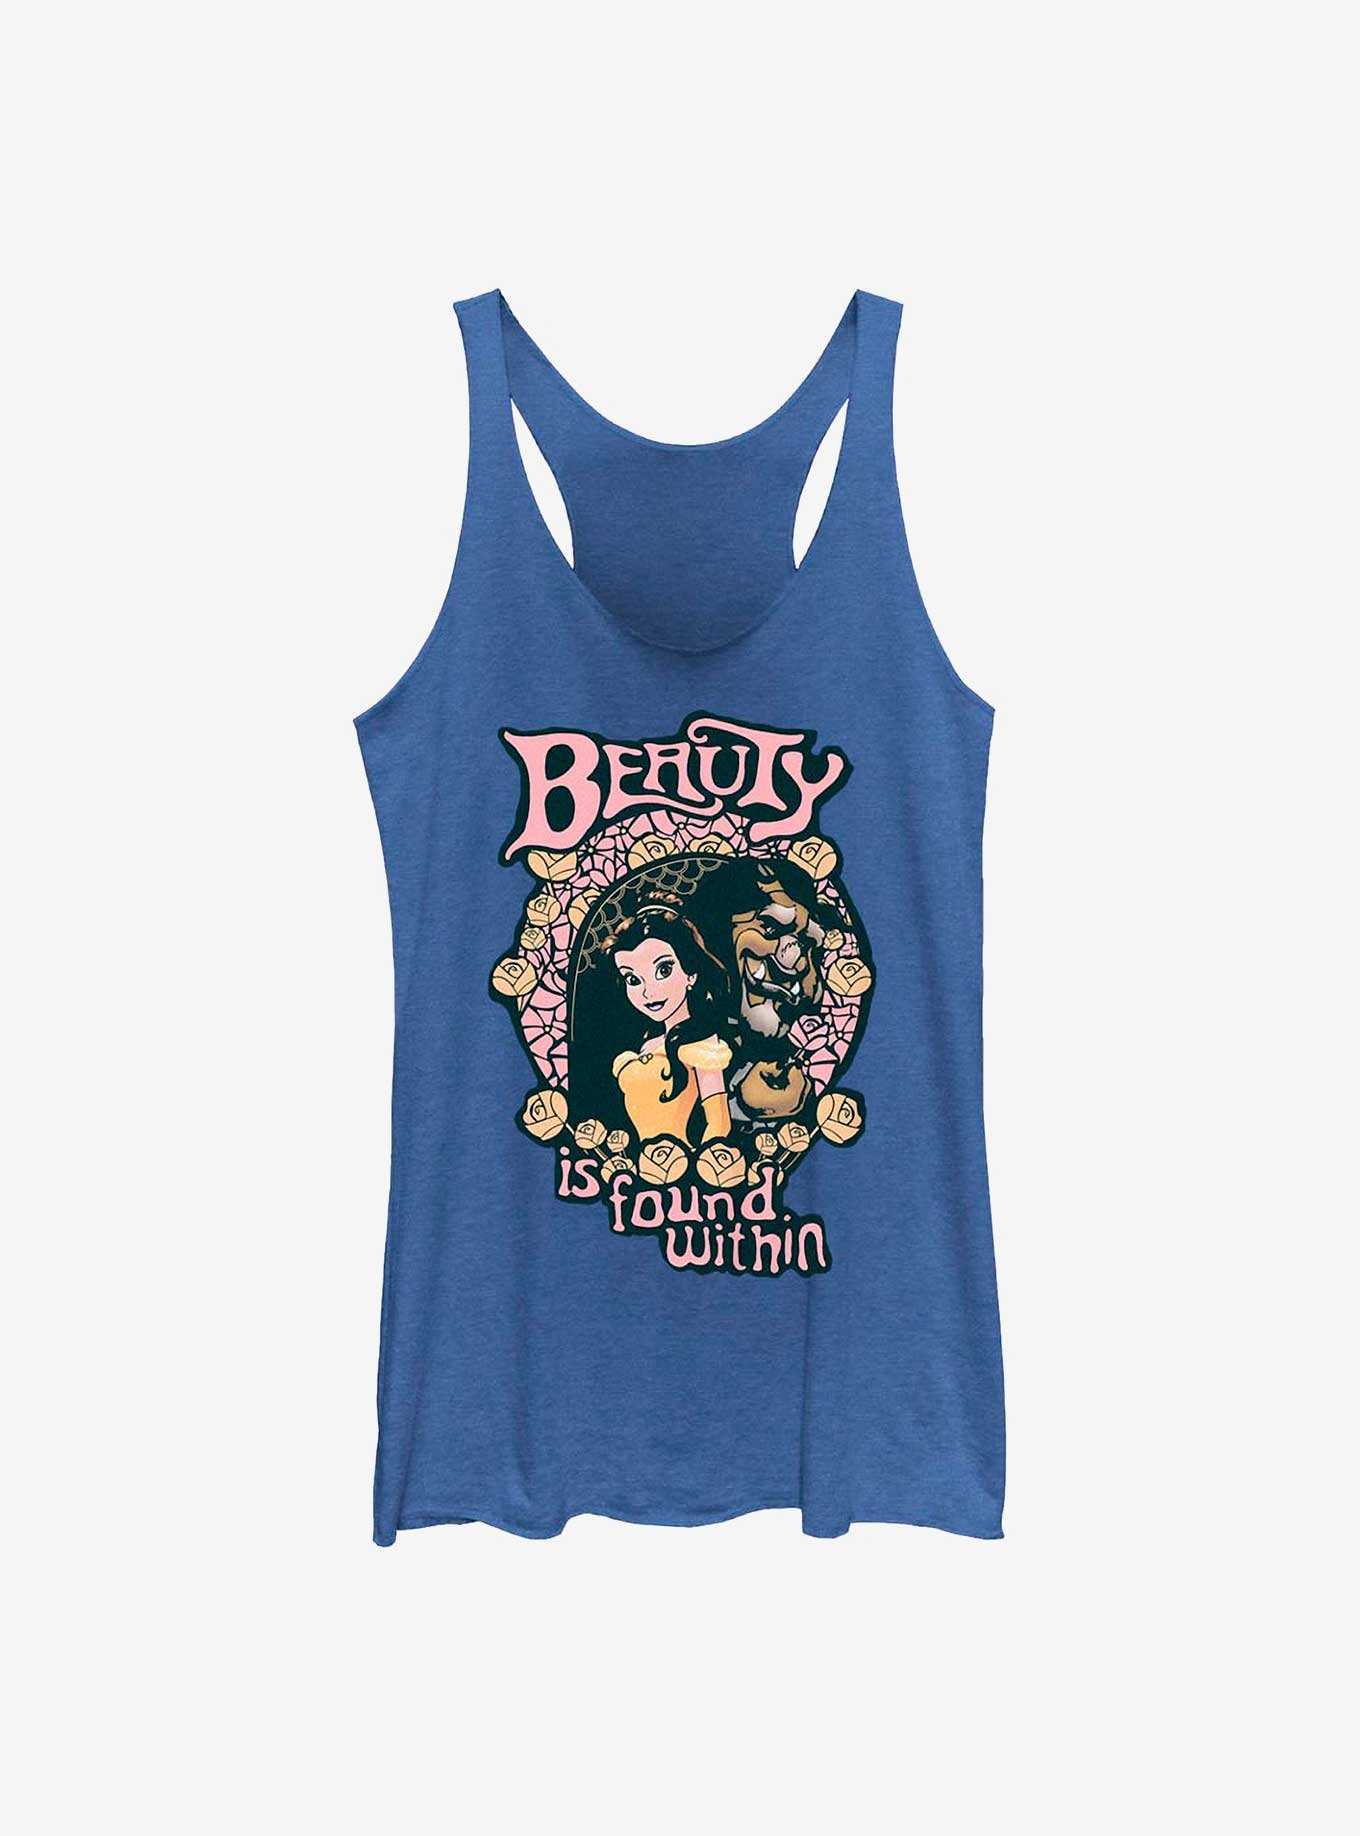 Disney Beauty and the Beast Beauty Is Found Within Womens Tank Top, , hi-res